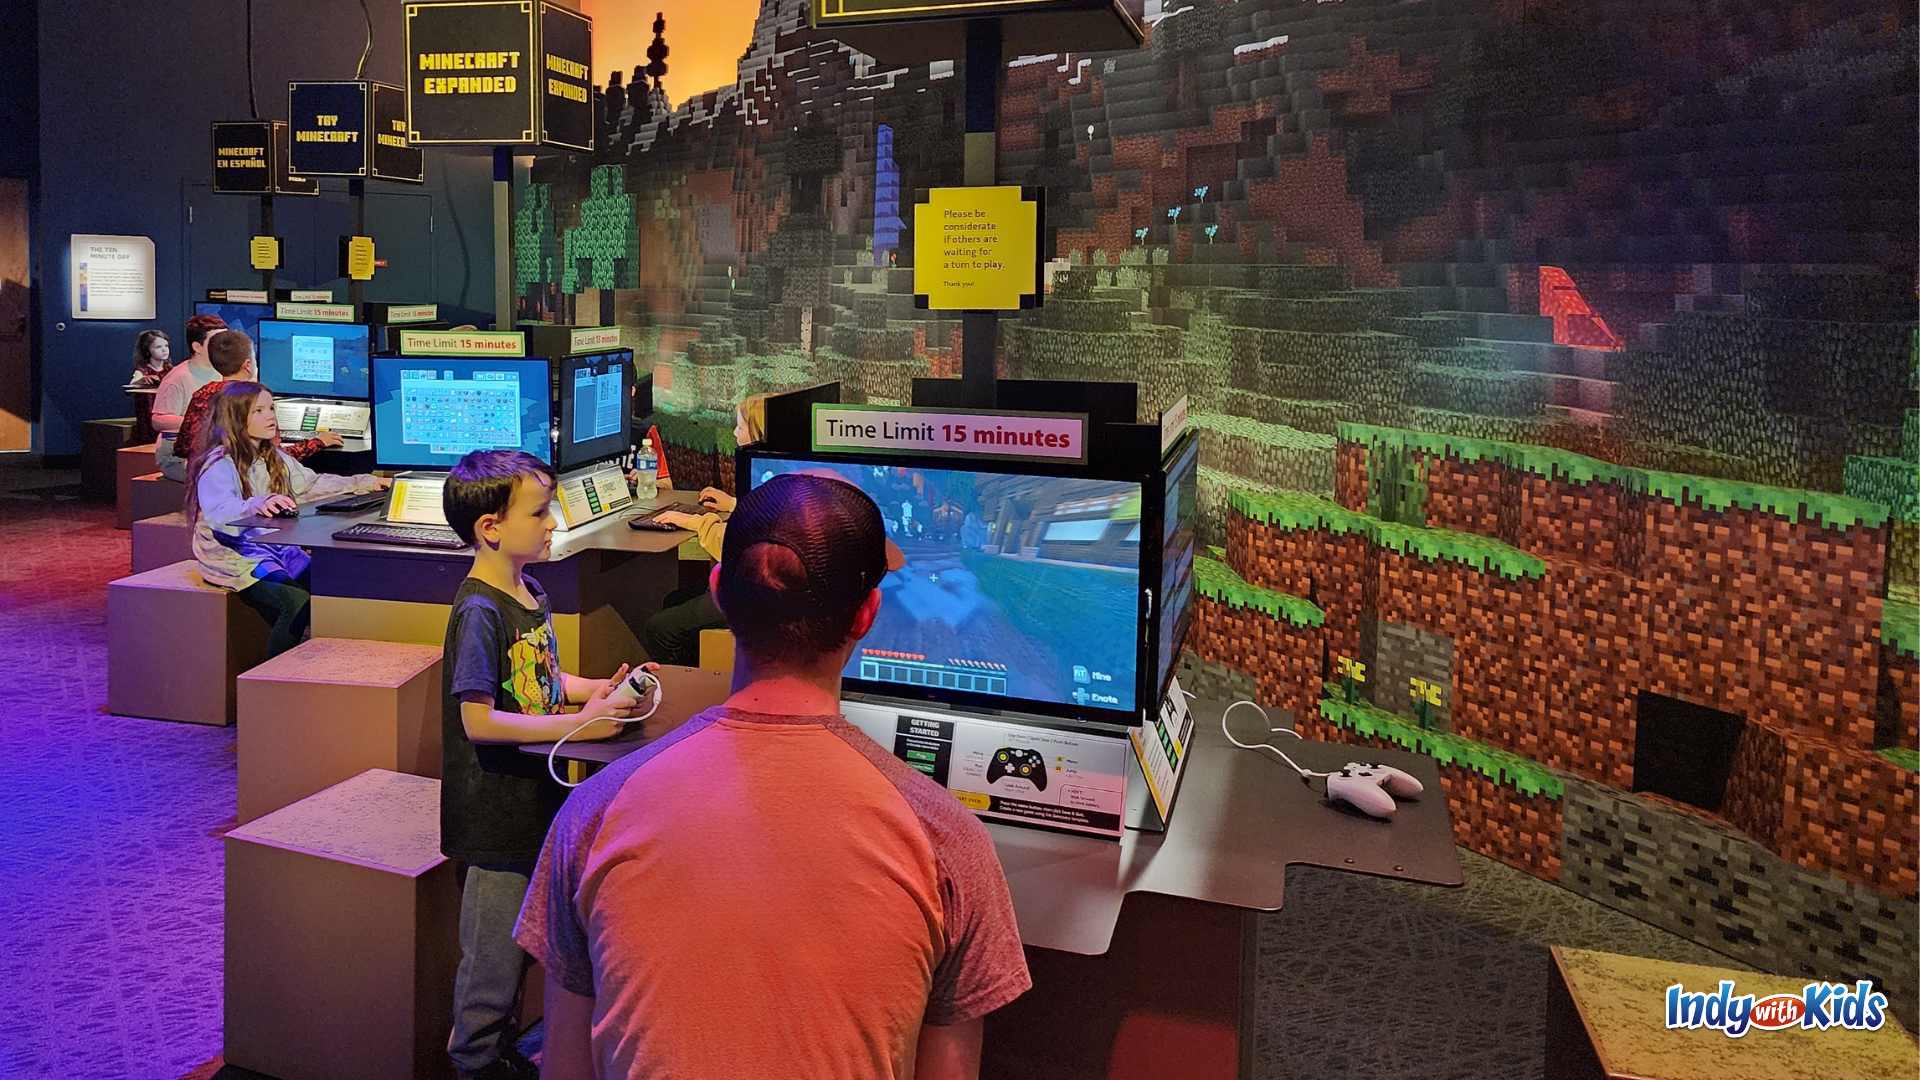 Minecraft: The Exhibition at The Children's Museum of Indianapolis beautiful builds game playing section.